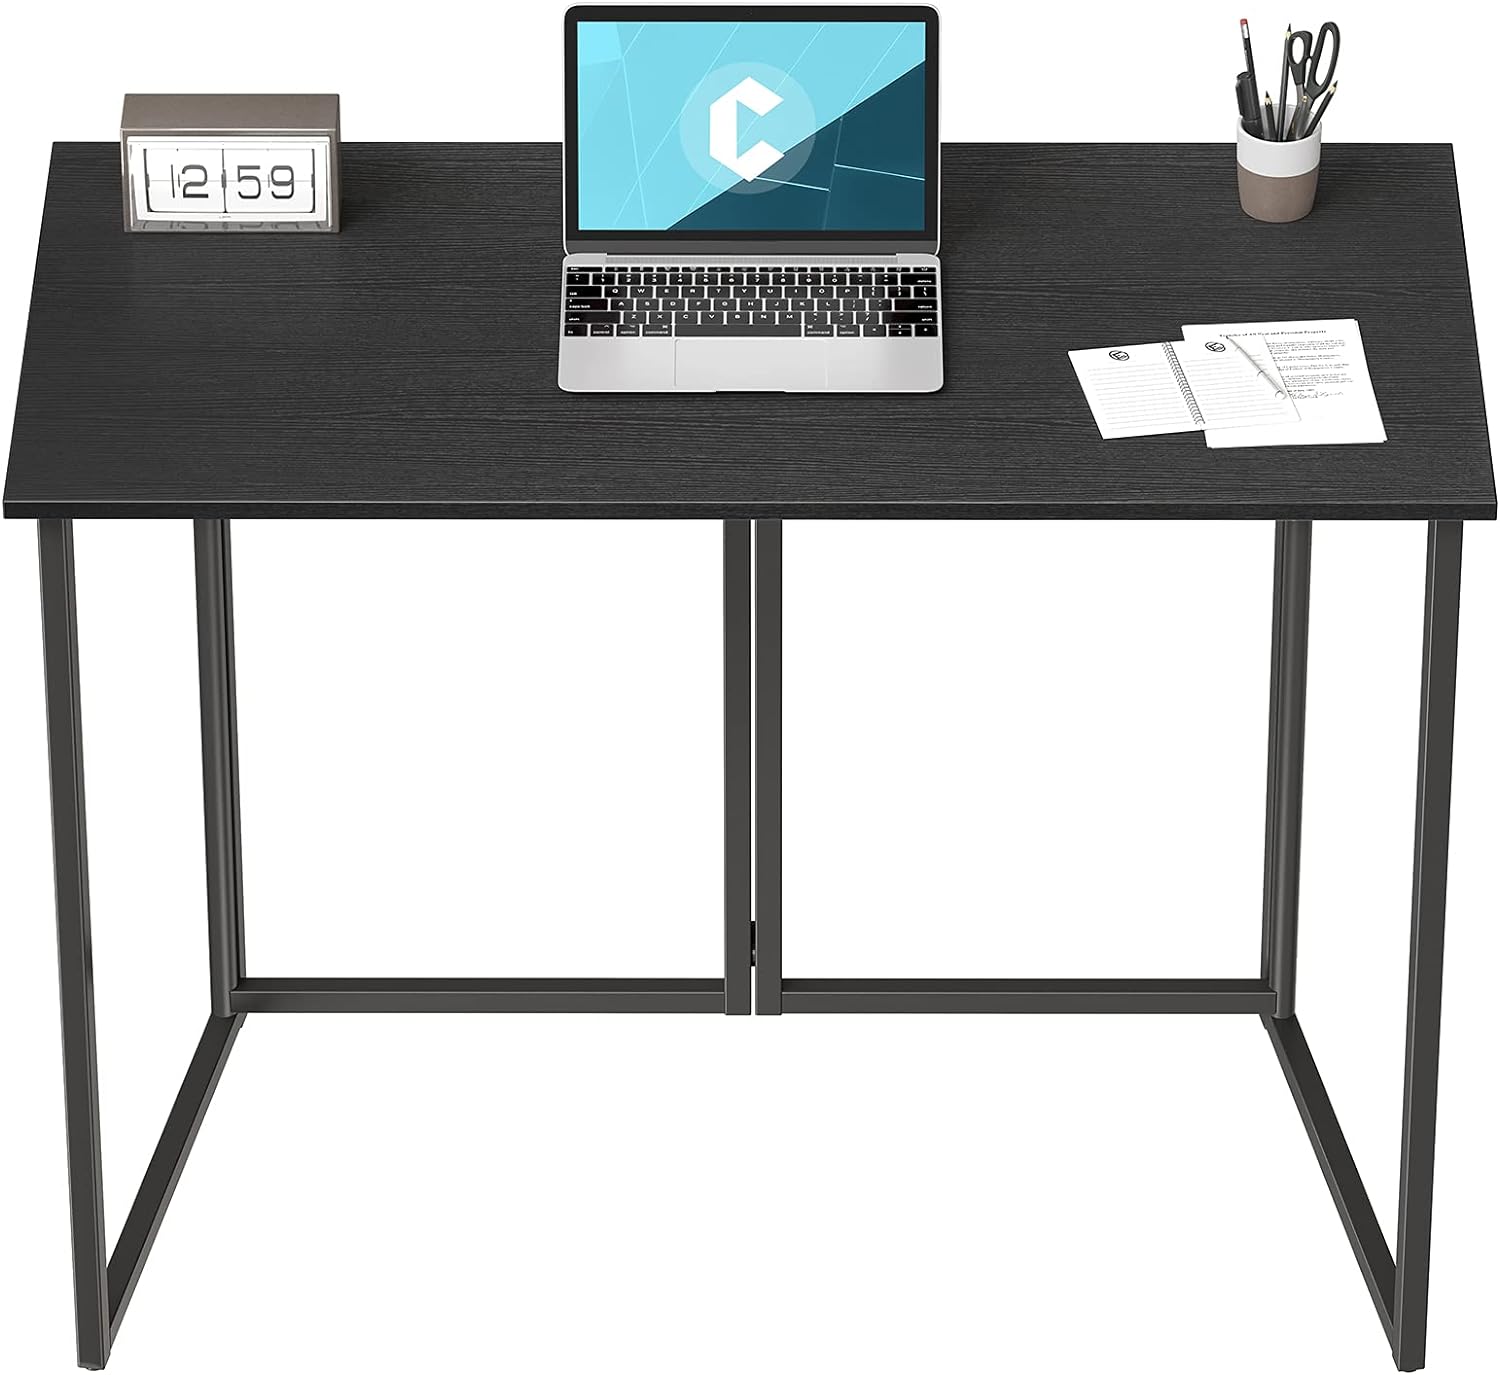 Folding Computer Desk ,Small Home Office Laptop Work Desk, Study Writing Table